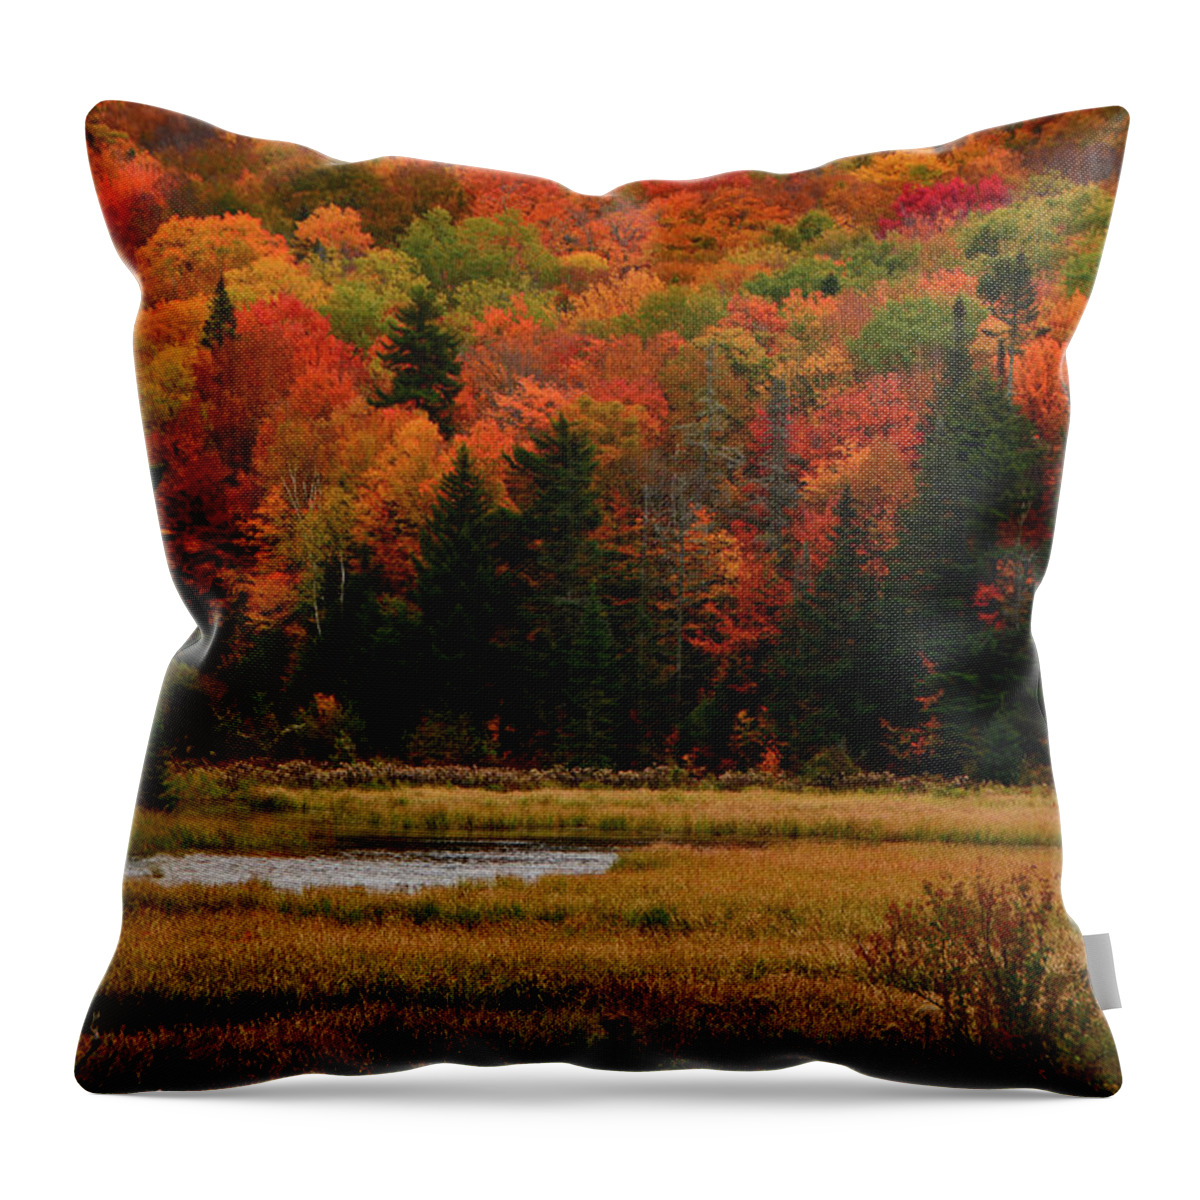 Sucker Pond Colors Throw Pillow featuring the photograph Sucker Pond Colors by Raymond Salani III